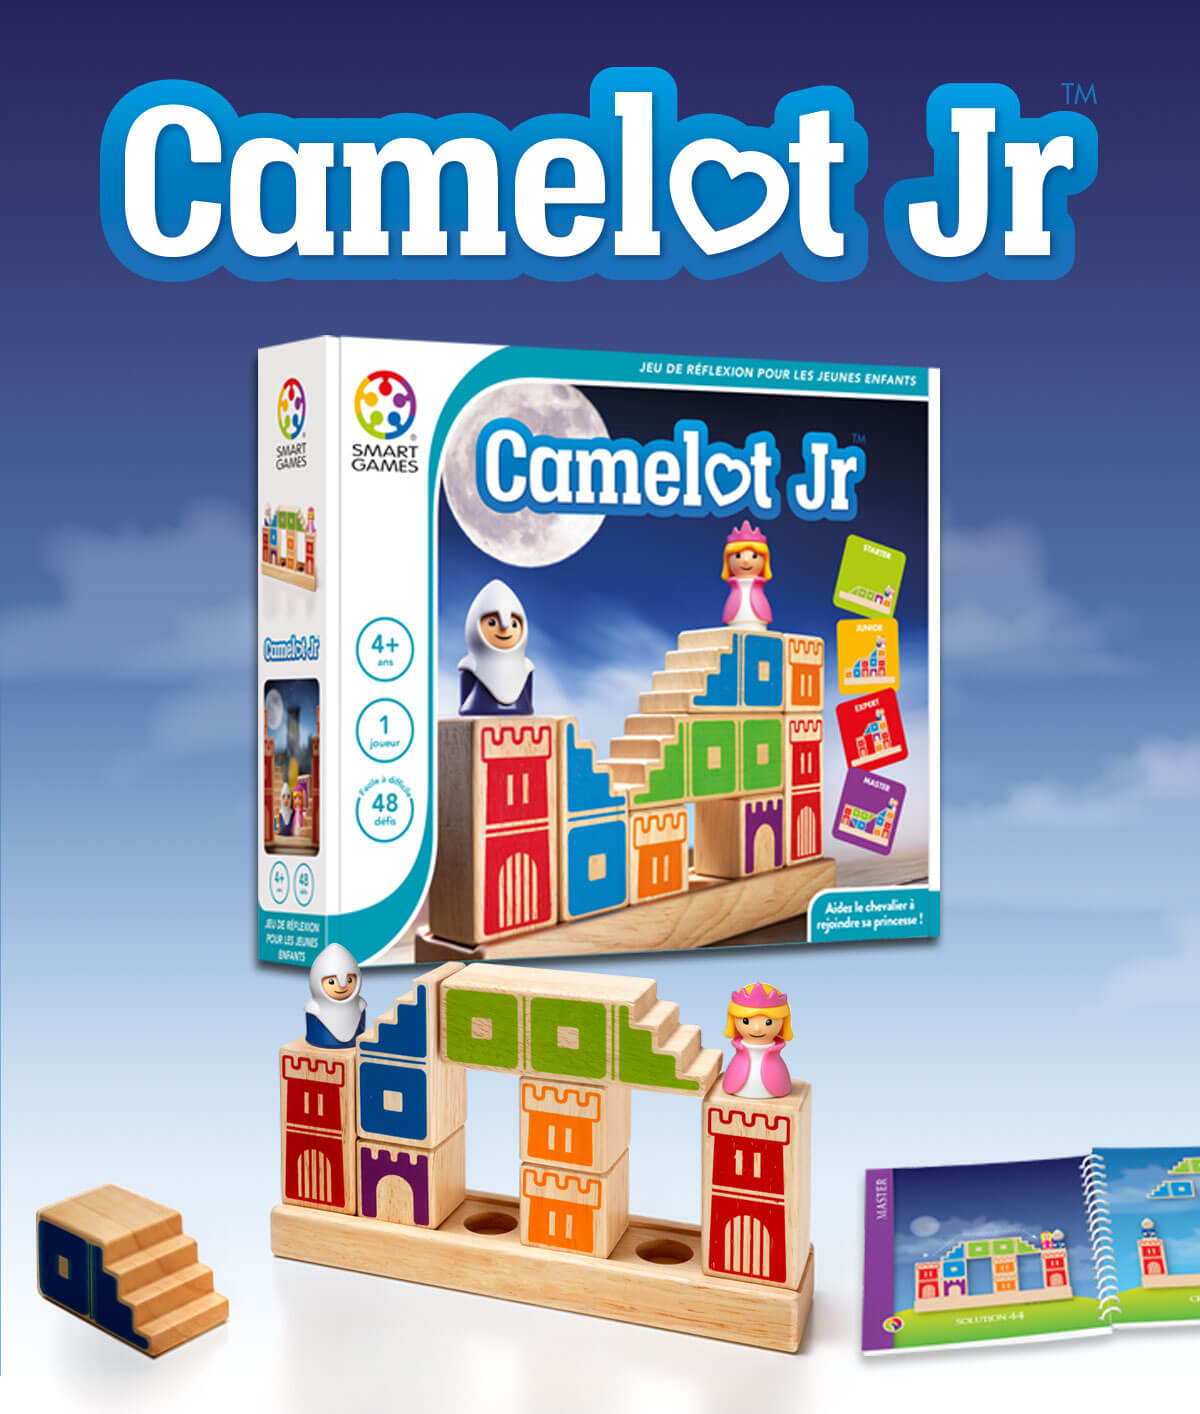 Buy Camelot Jr. from SmartGames, Brain teaser puzzle games